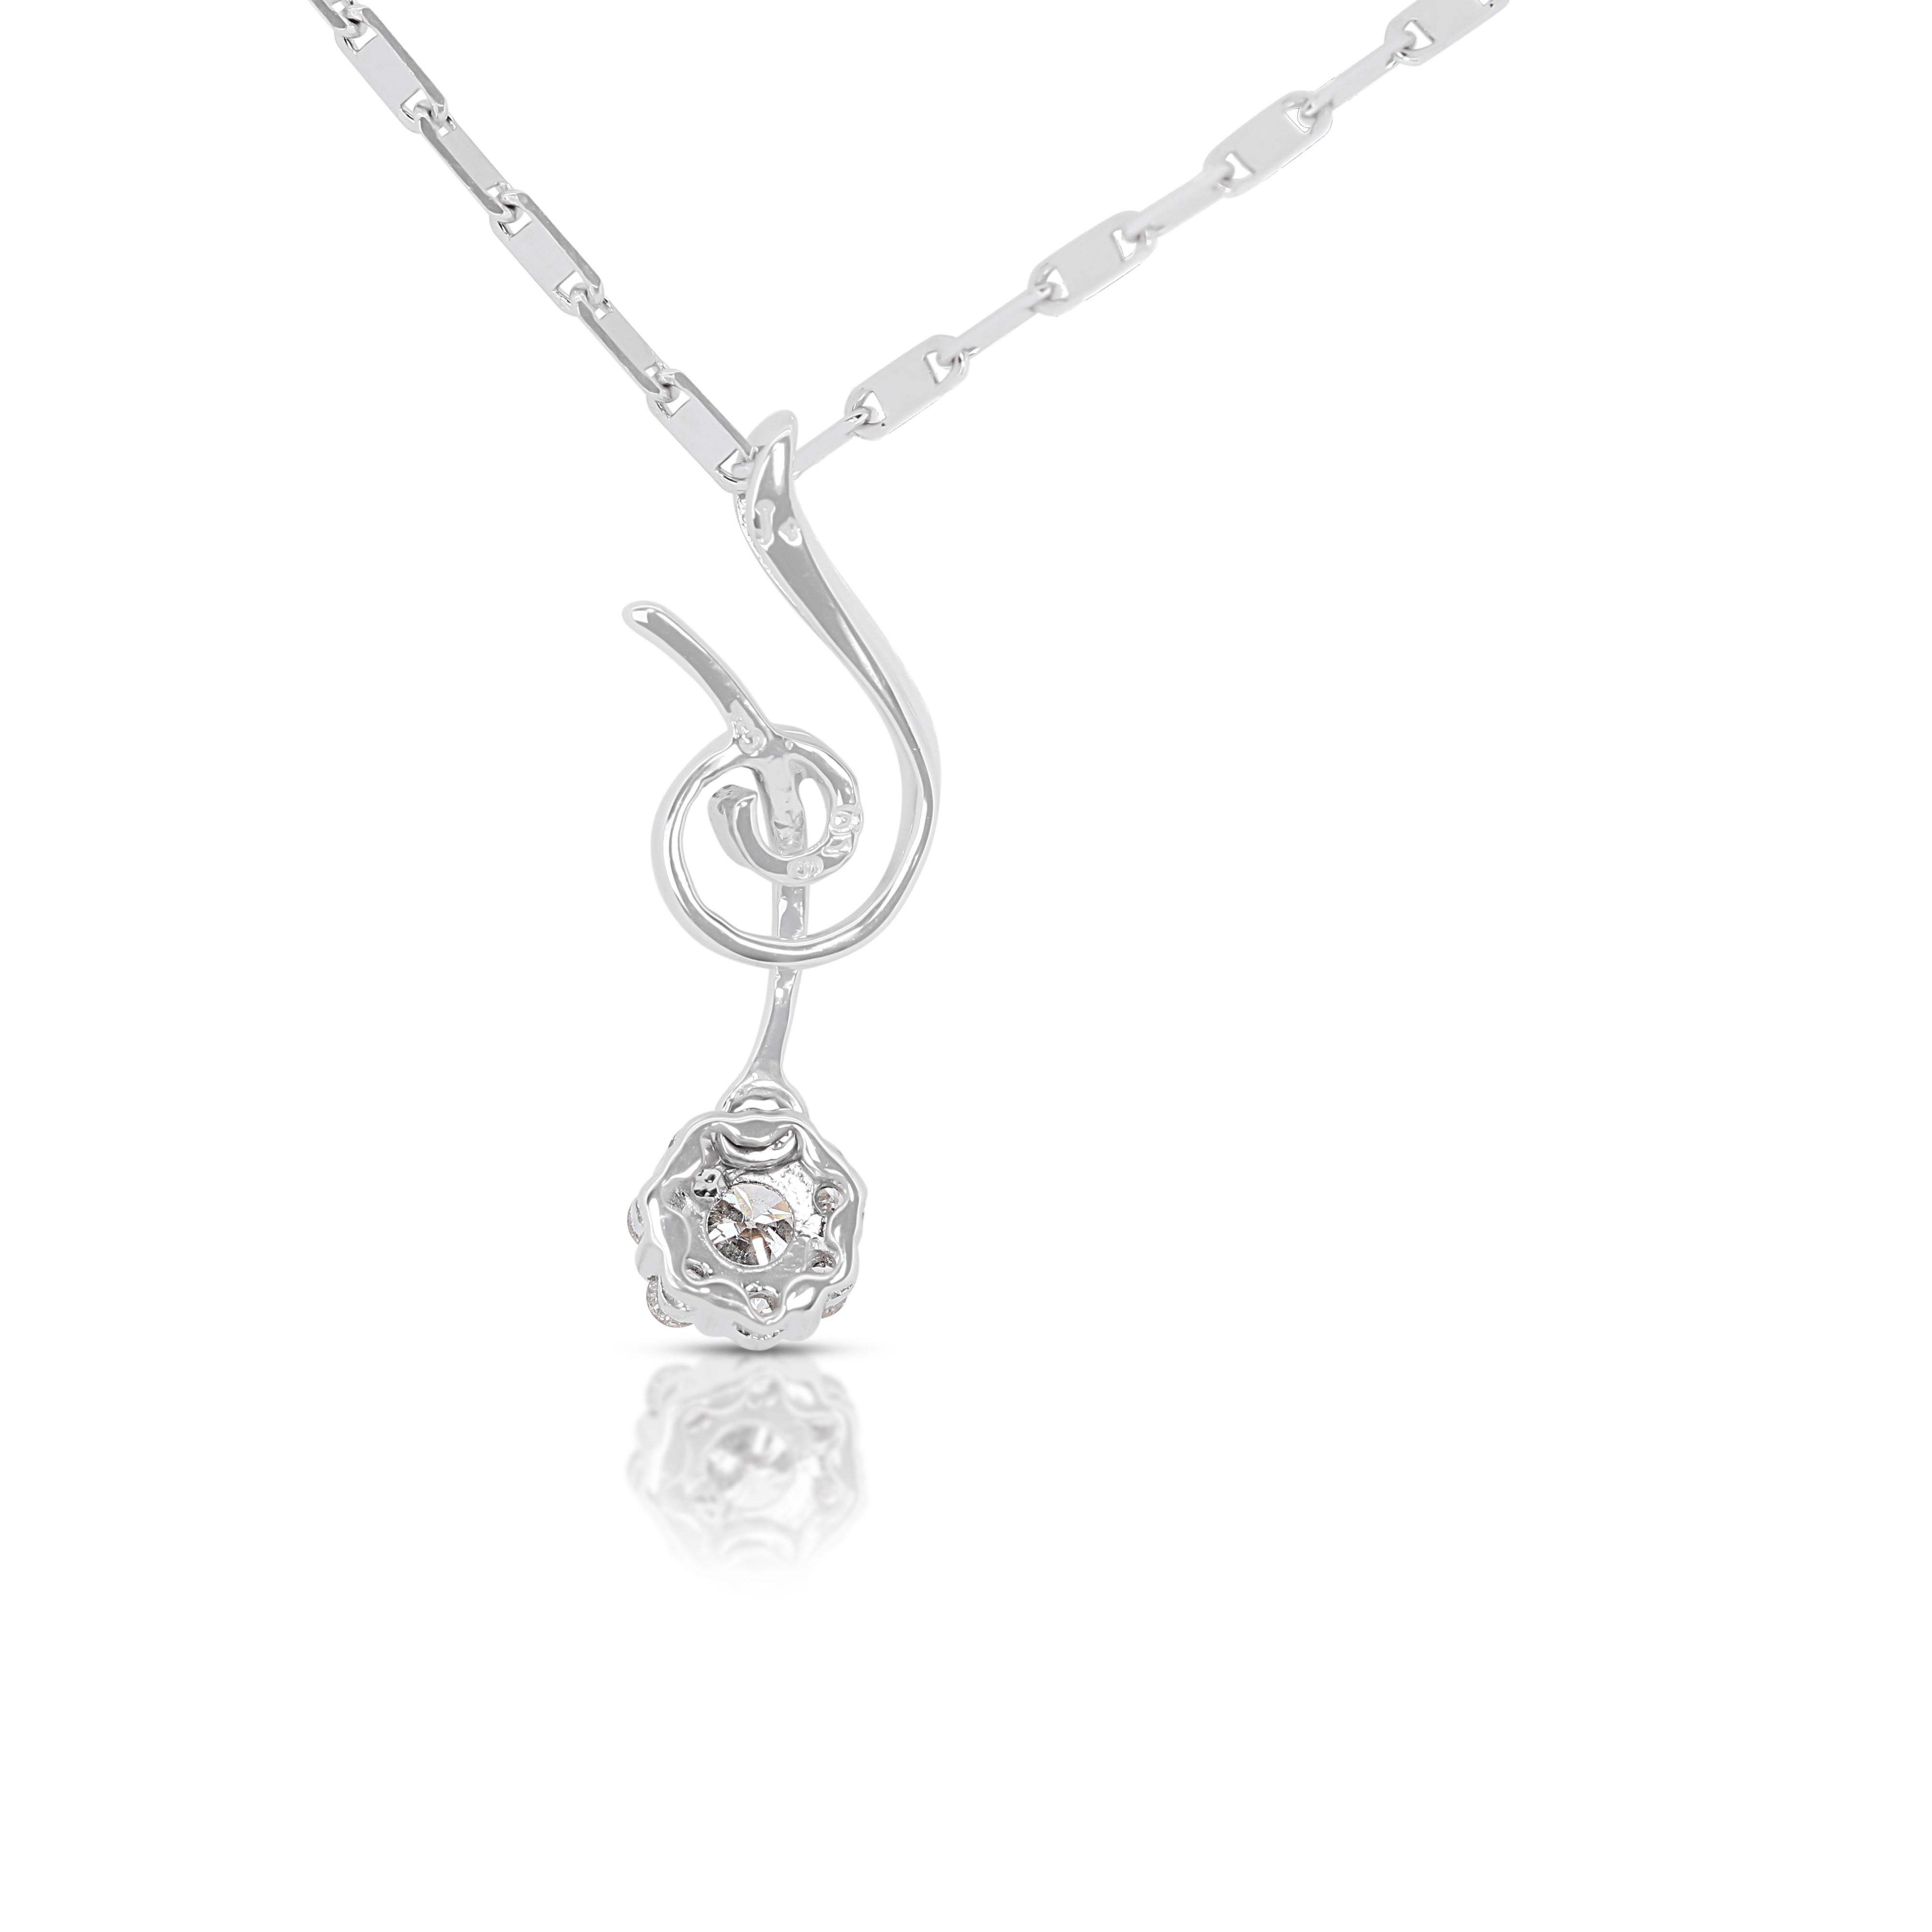 Stunning 0.16ct Diamonds Necklace in 18K White Gold - (Chain Included) For Sale 1